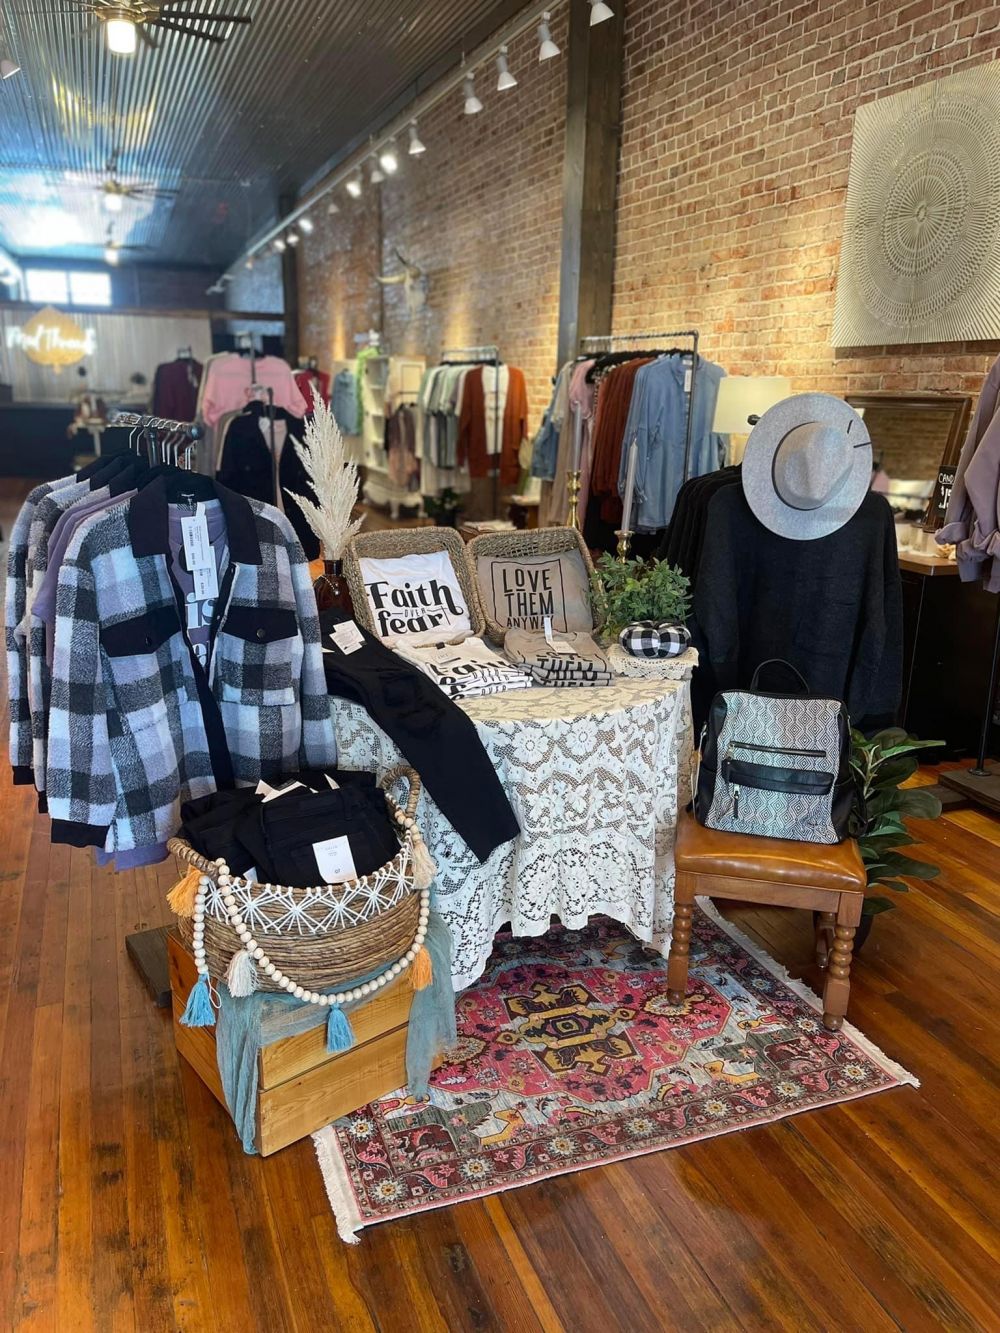 Stay-dine-discover-enjoy-mt-vernon-illinois-boutiques